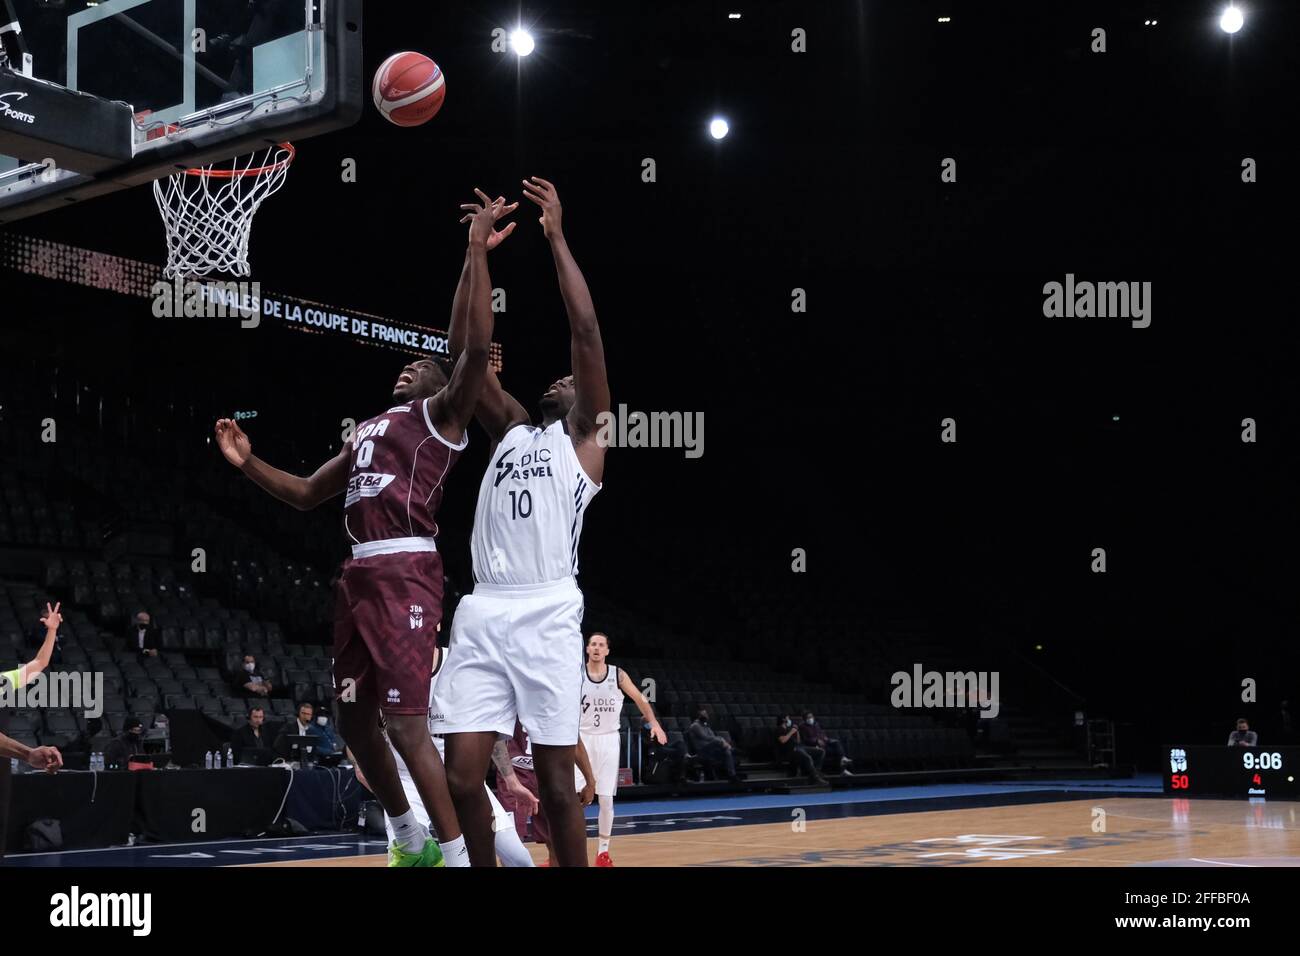 Levallois, Hauts de Seine, France. 24th Apr, 2021. MOUSTAPHA FALL (FRA)  center of ASVEL LDLC in action during the French Cup of Basketball between  Dijon and Lyon-Villeurbanne ASVEL LDLC (Tony Parker Team)